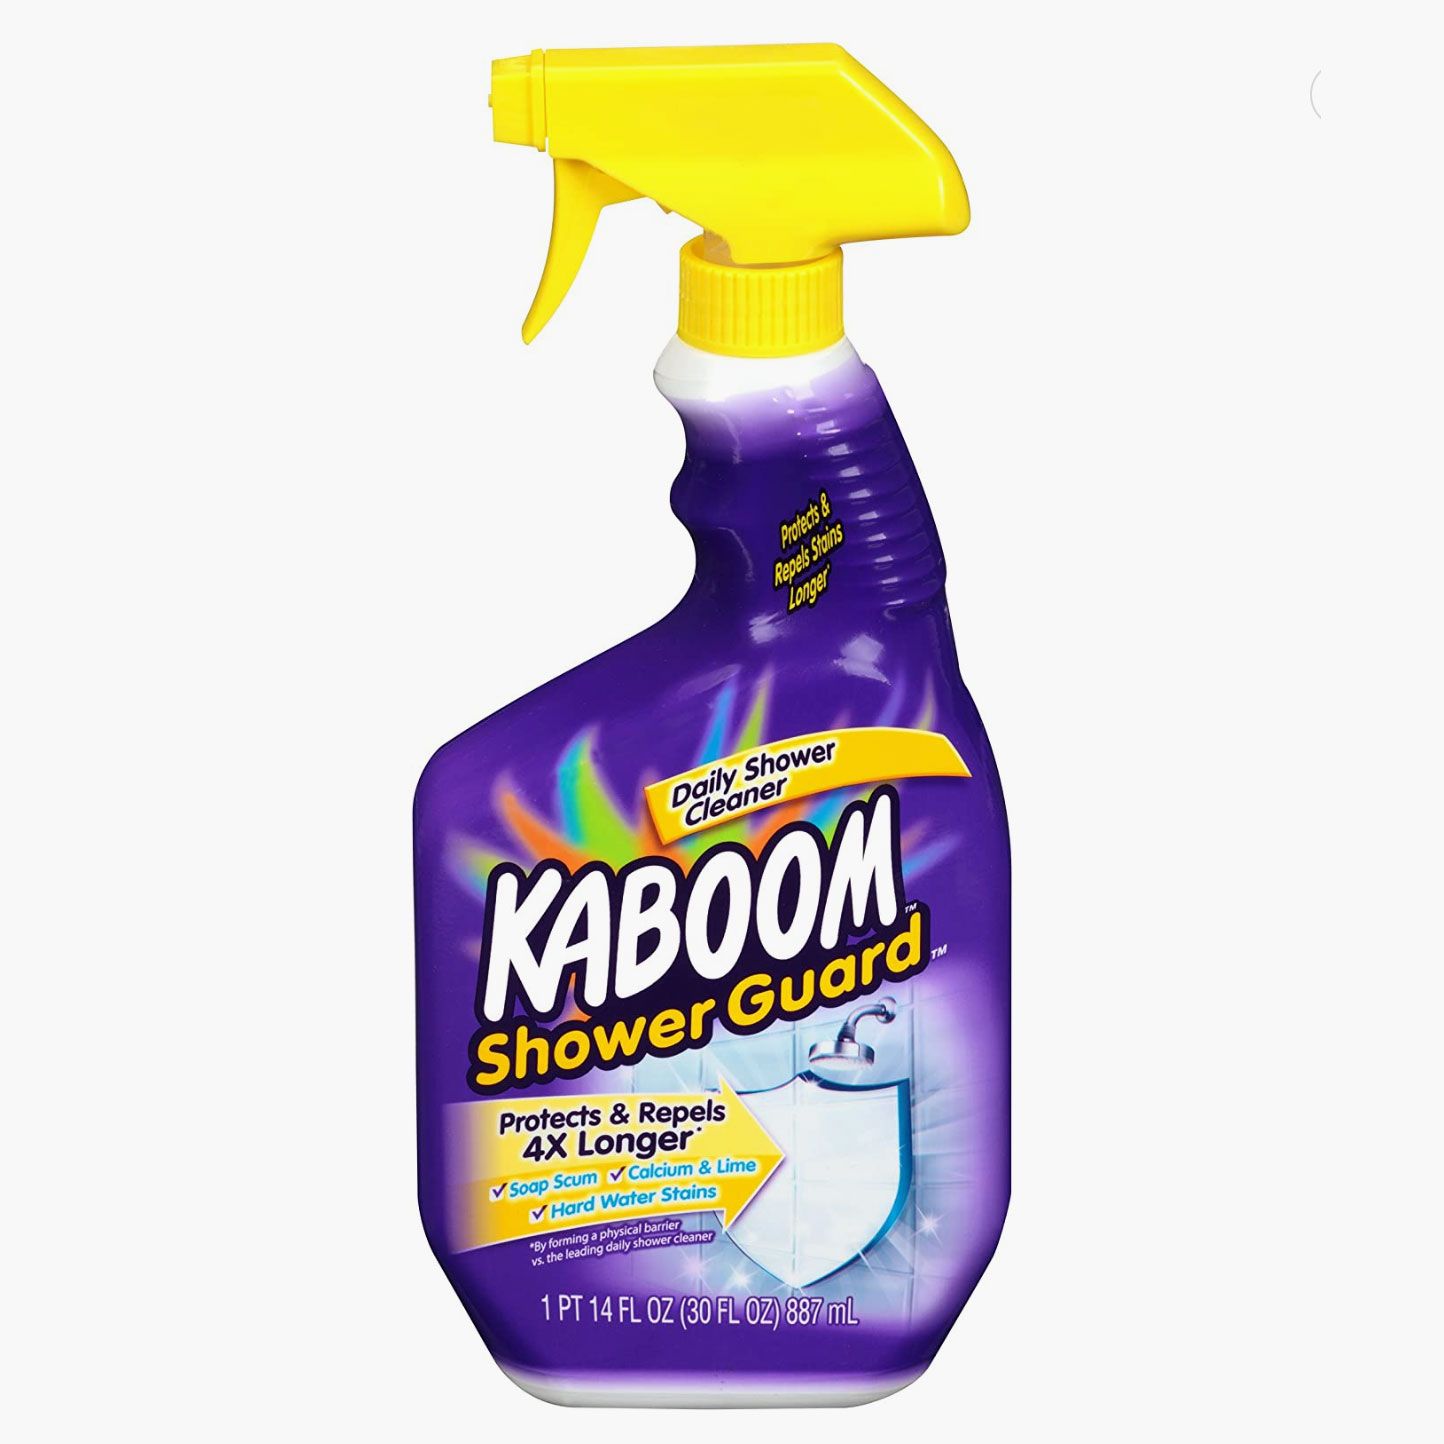 The 25 Best Cleaning Products of 2022 – PureWow